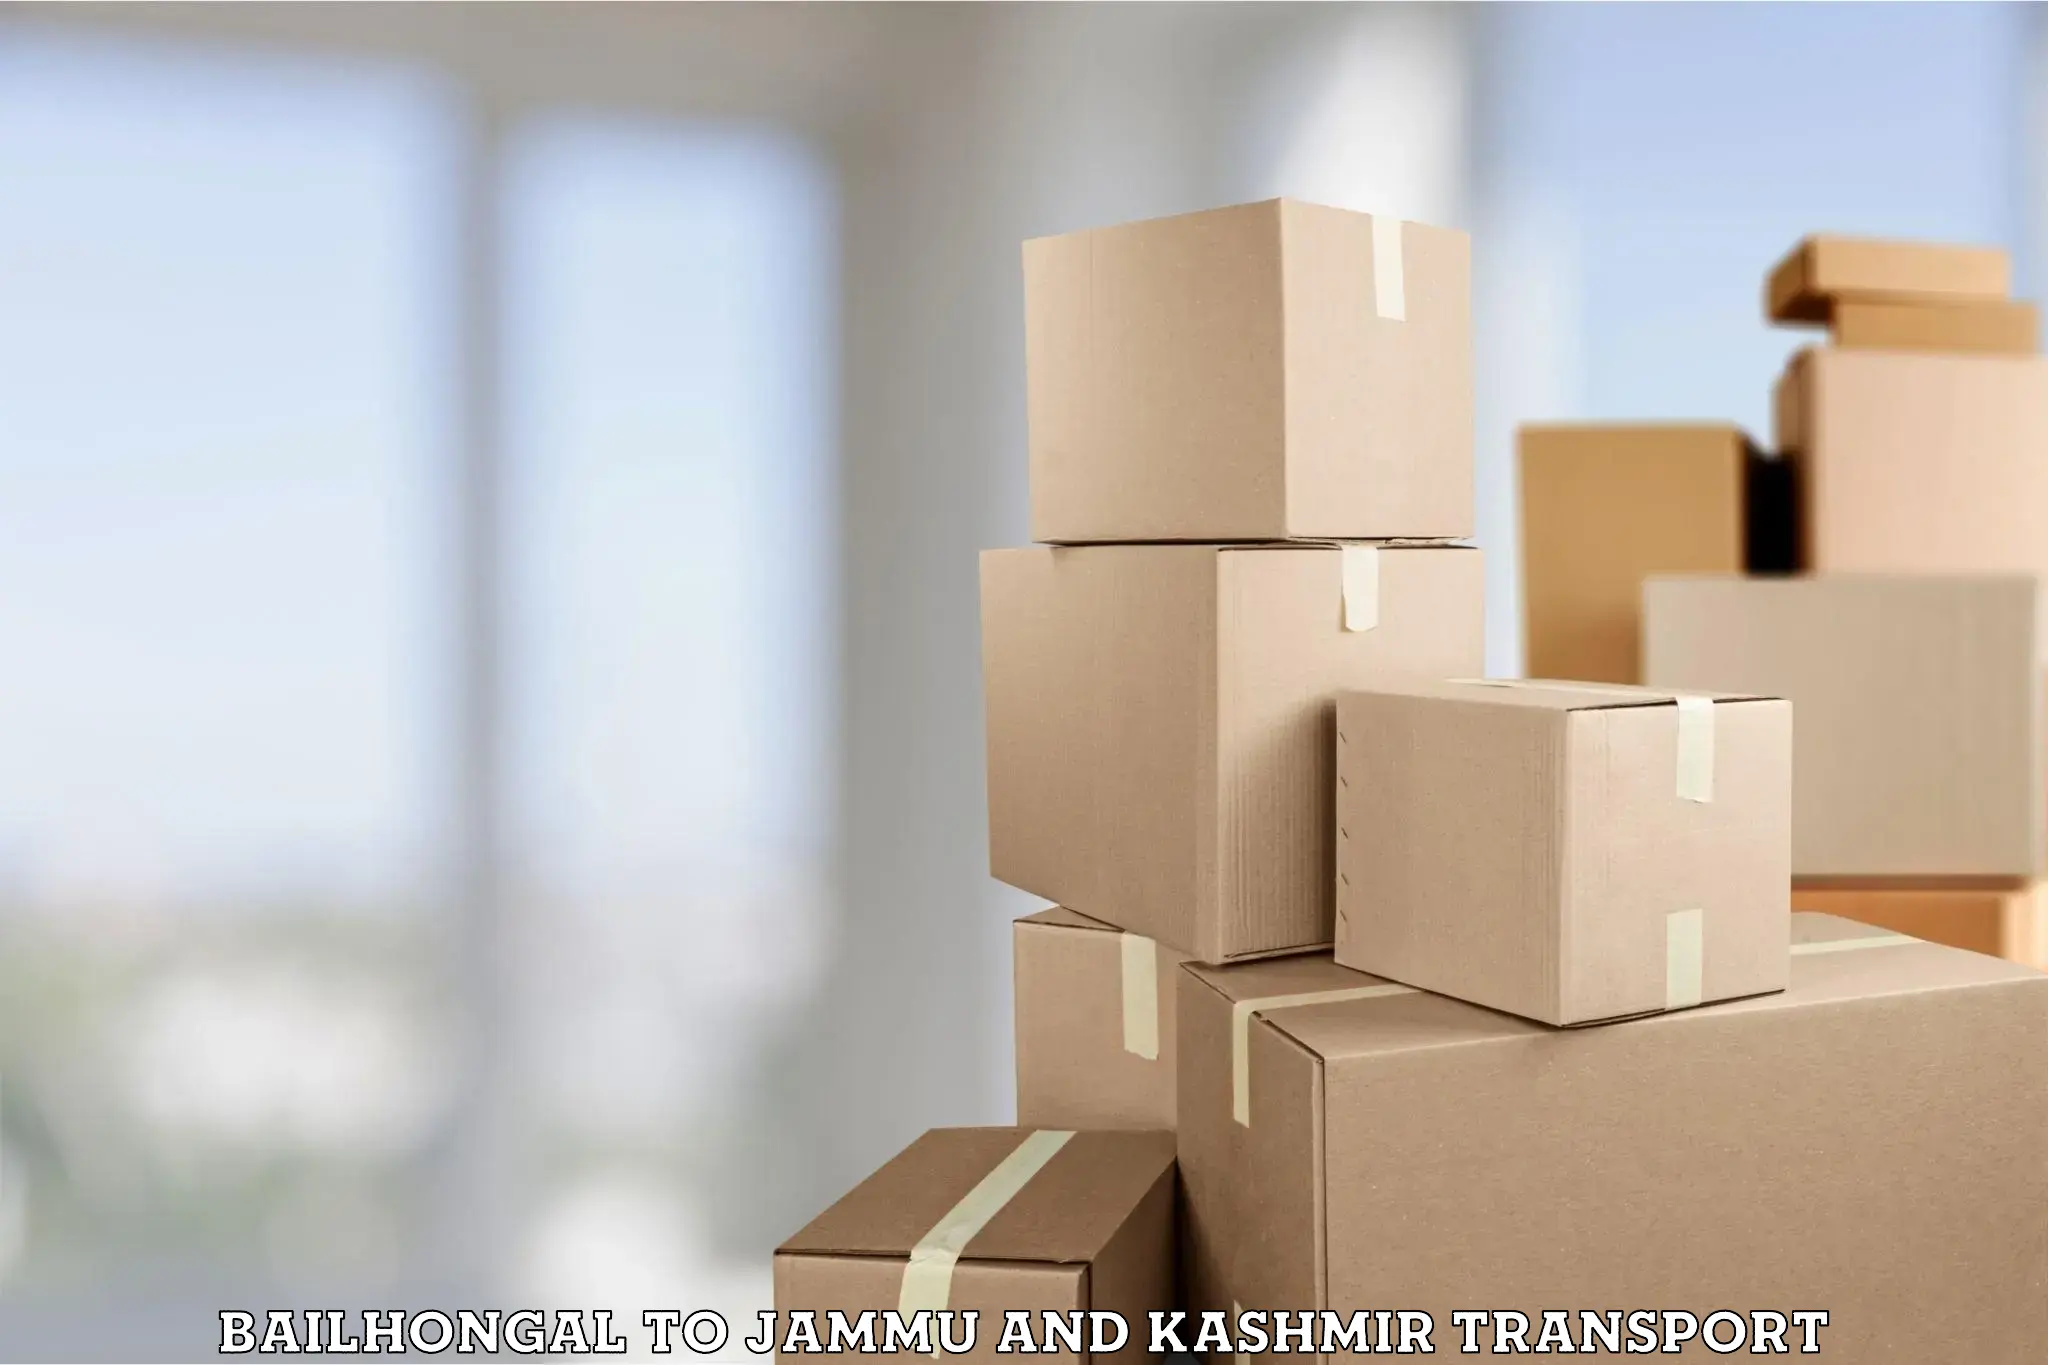 Container transport service Bailhongal to Jammu and Kashmir